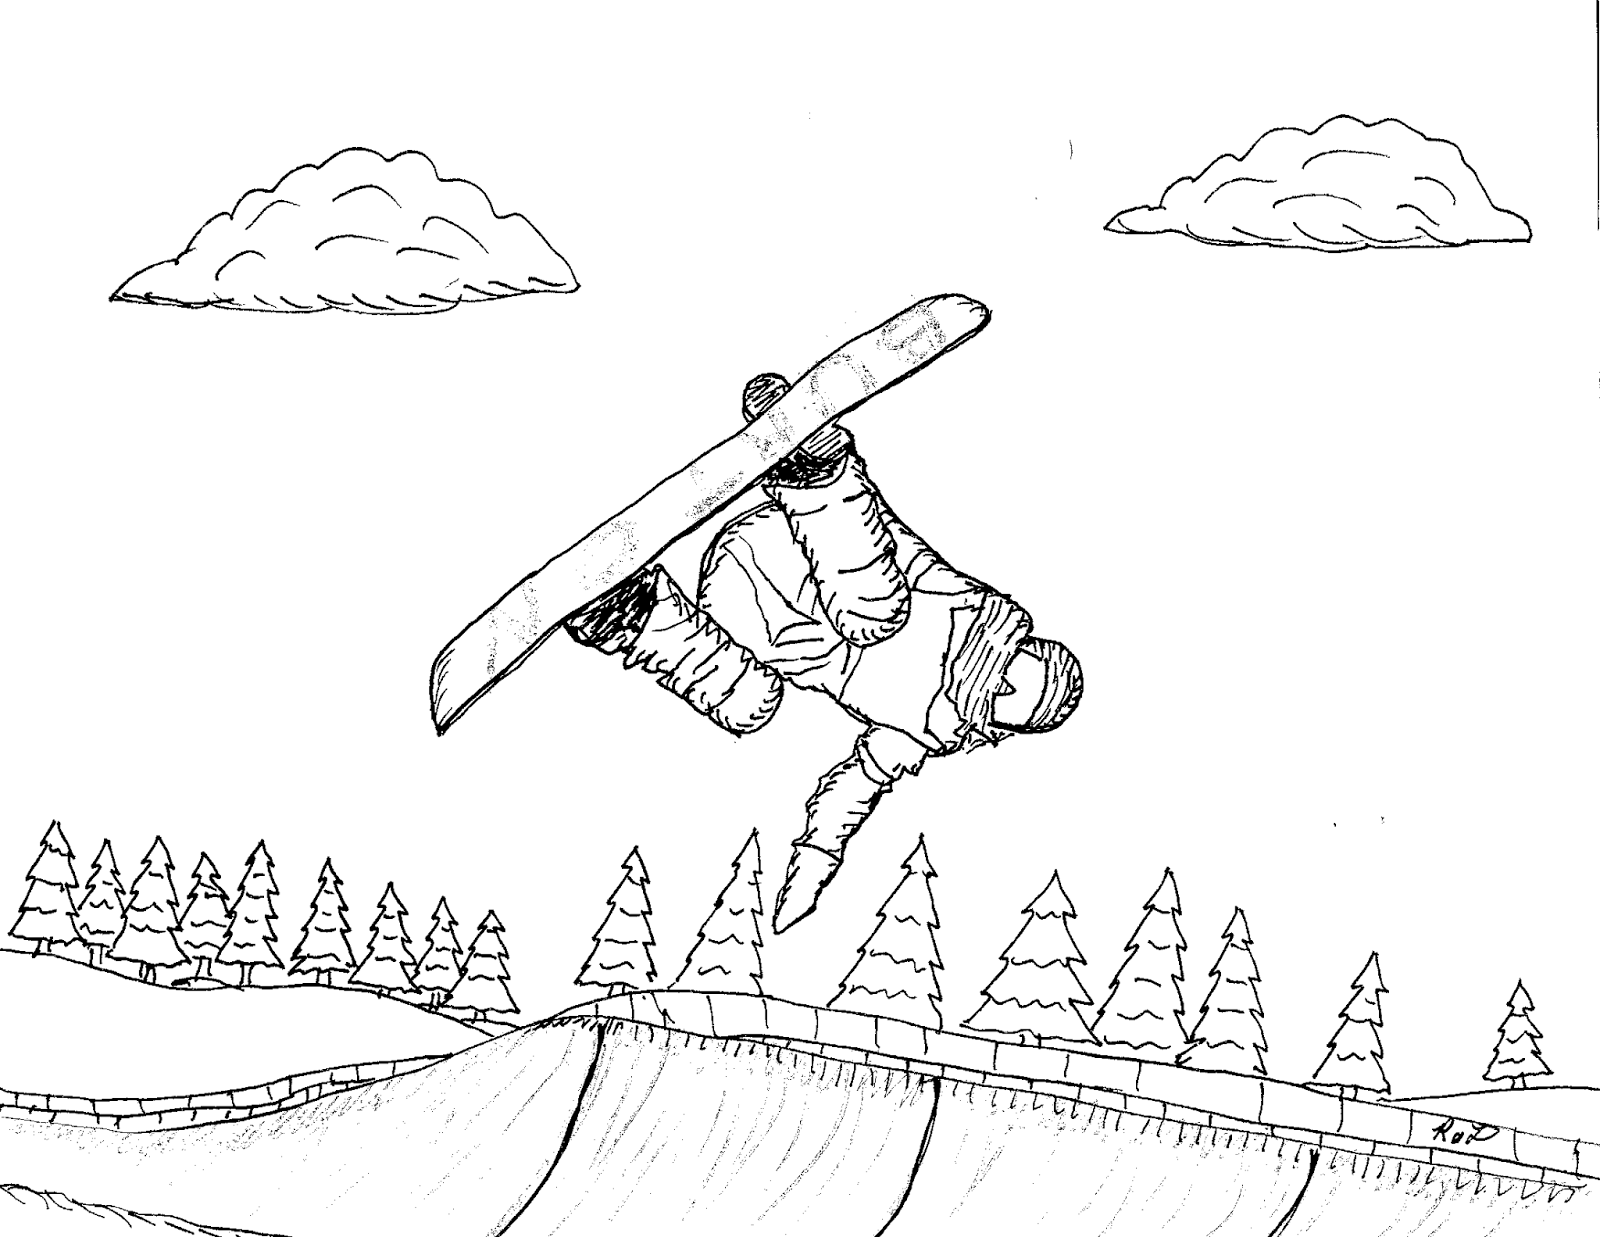 Robin's Great Coloring Pages: Chloe Kim Snowboarder at the Winter Olympics